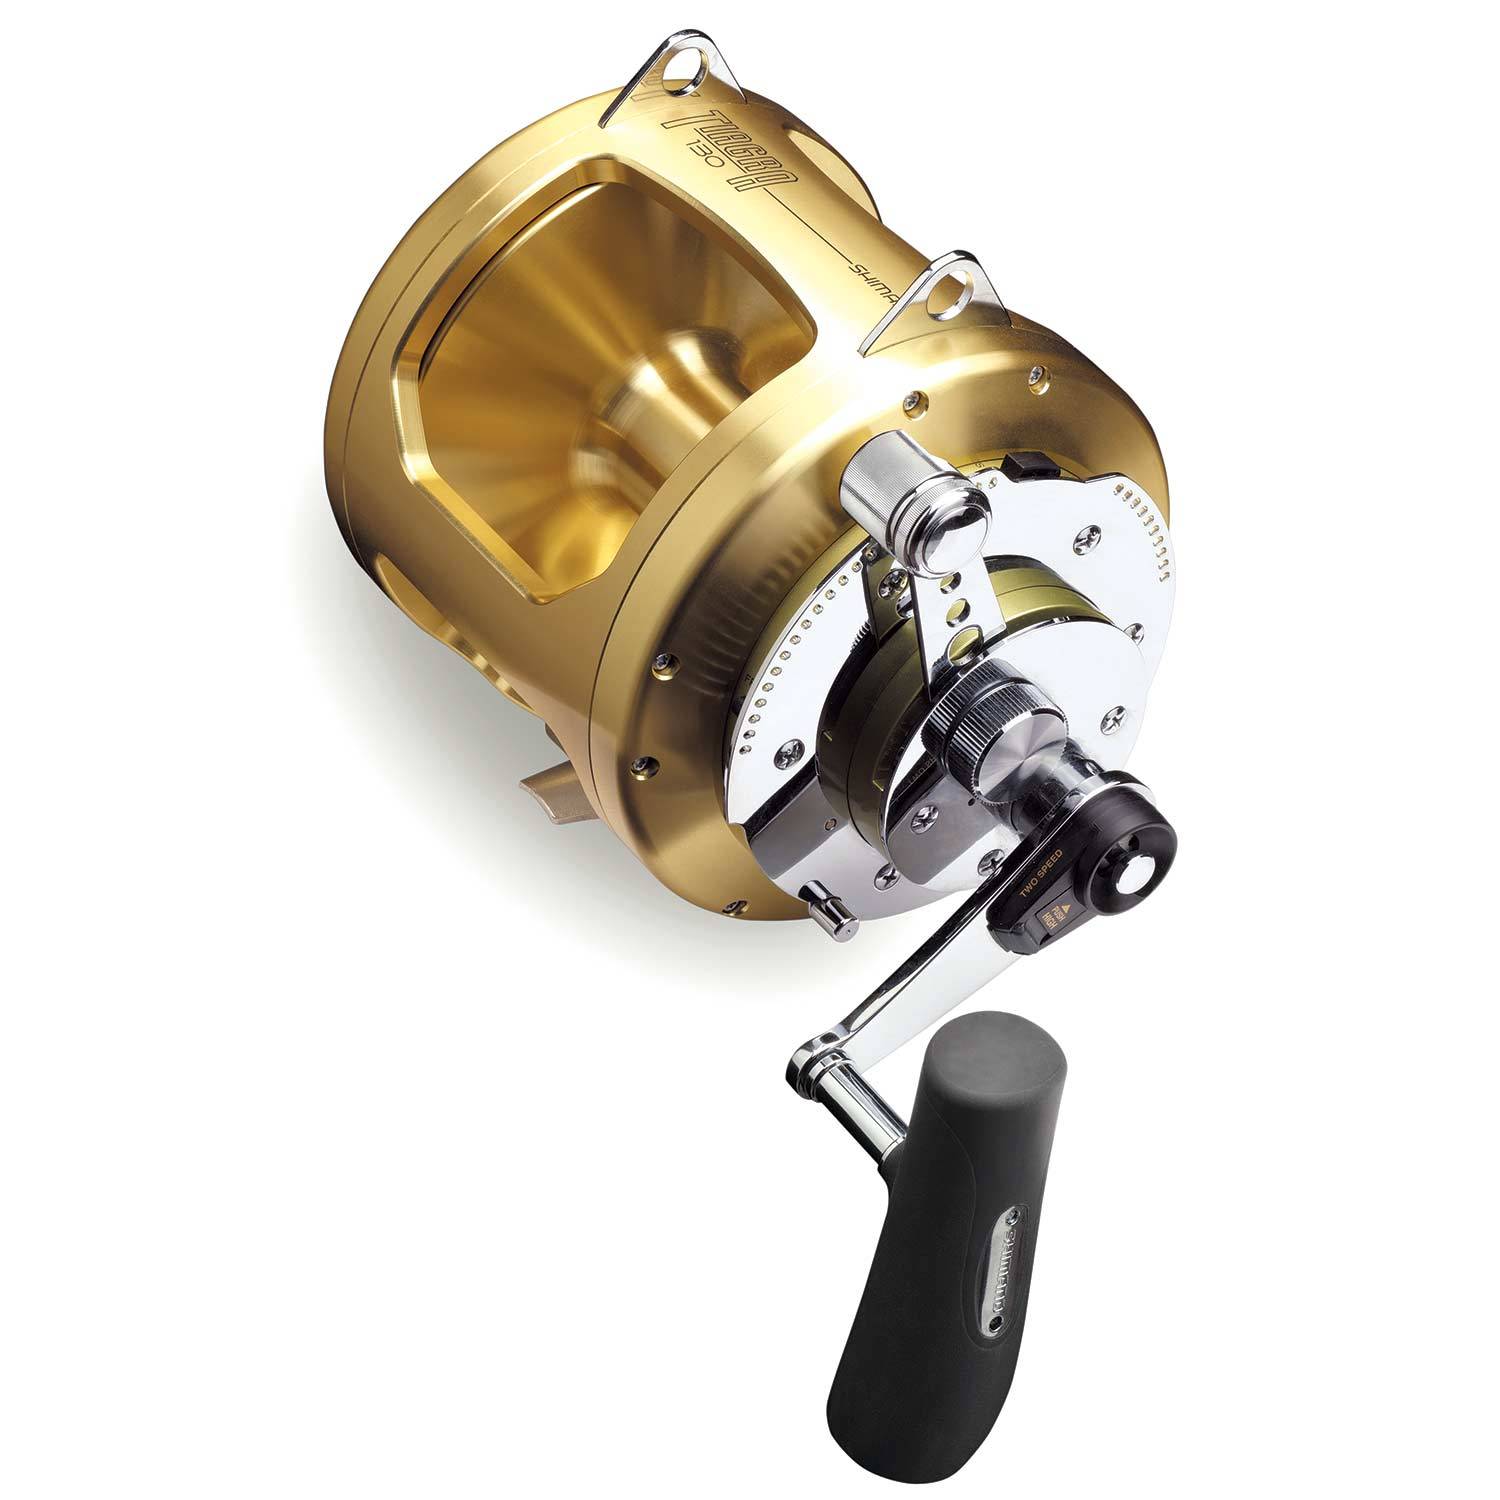 Tiagra A TI130A Big Game Two-Speed Conventional Reel, 39 Line Speed